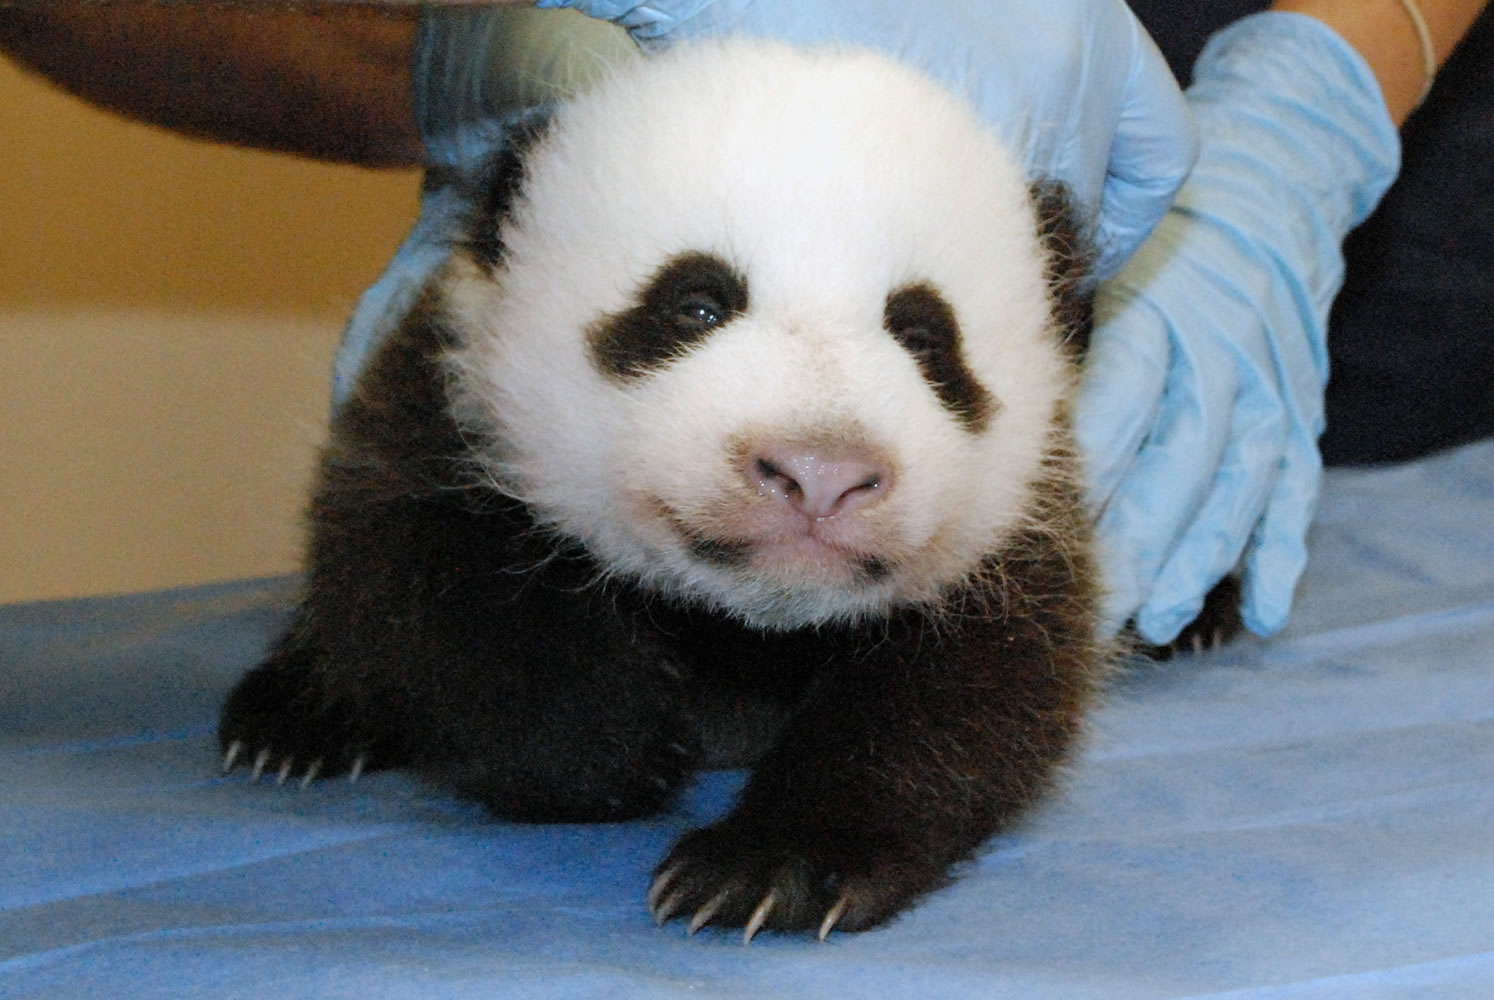 Of all resumptions Thursday in rebooted Washington, that of the National Zoo's panda cams was perhaps the most eagerly awaited. The female cub, shown at an Oct.